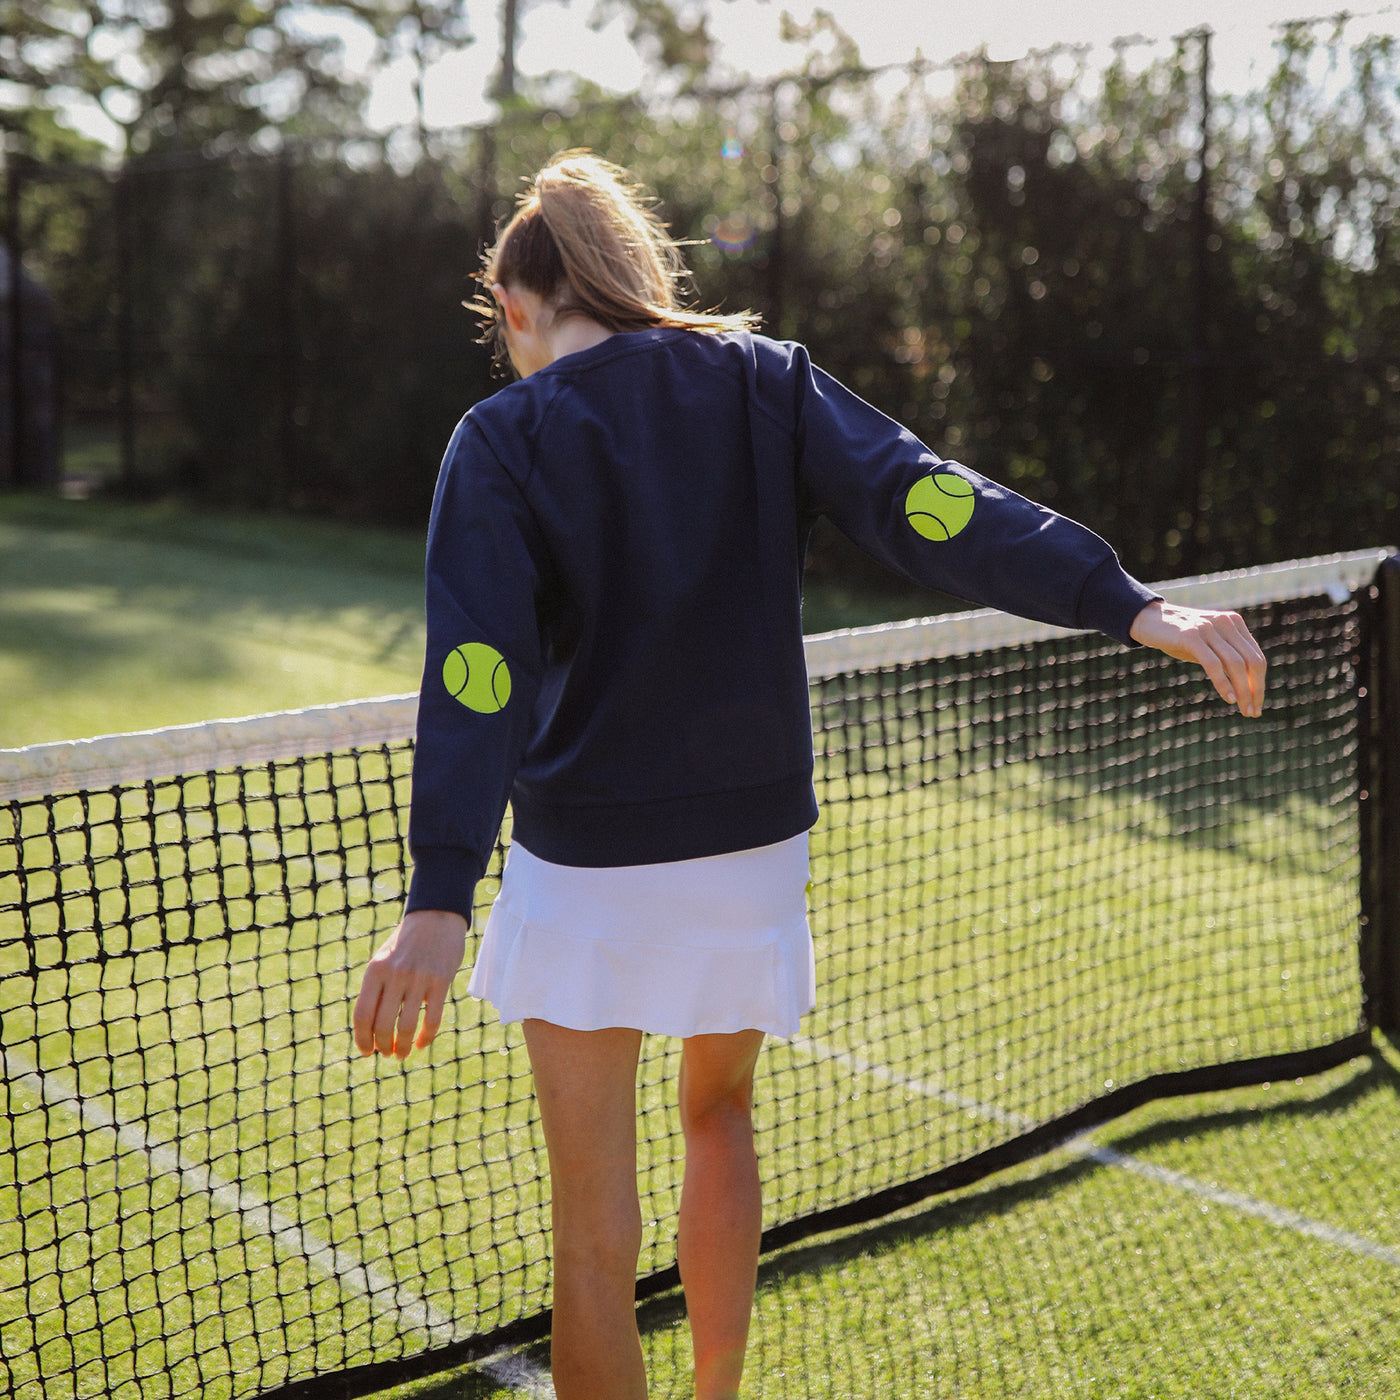 Navy women's sweatshirt with lime embroidery on neckline that reads "tennis anyone" and embroidered tennis ball patches on the elbows.